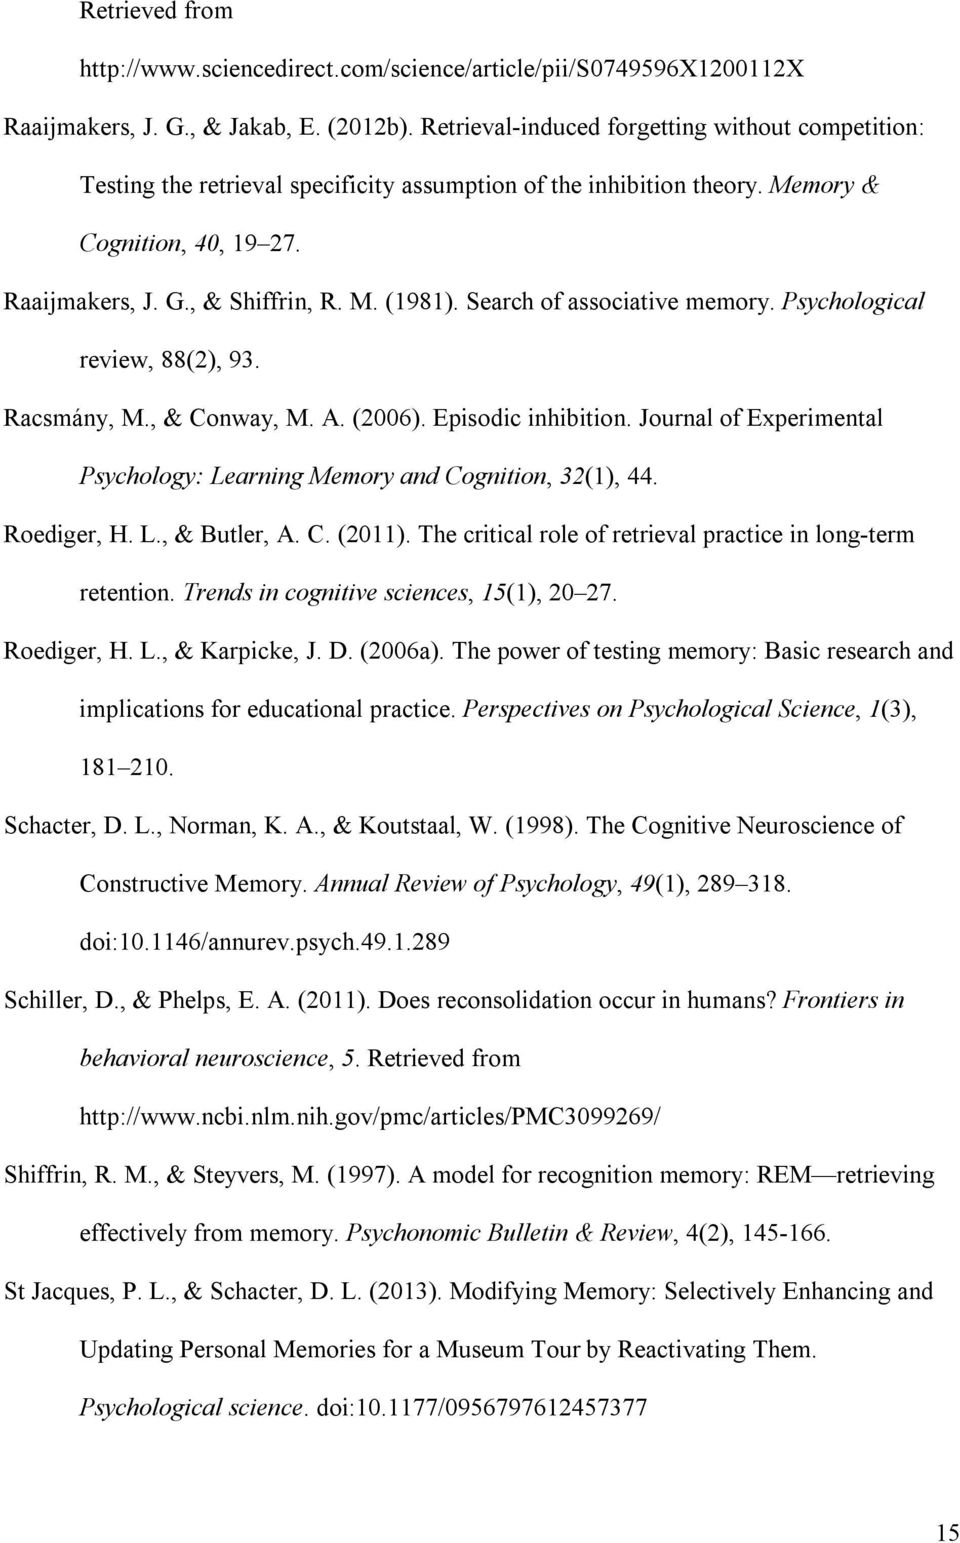 Search of associative memory. Psychological review, 88(2), 93. Racsmány, M., & Conway, M. A. (2006). Episodic inhibition. Journal of Experimental Psychology: Learning Memory and Cognition, 32(1), 44.